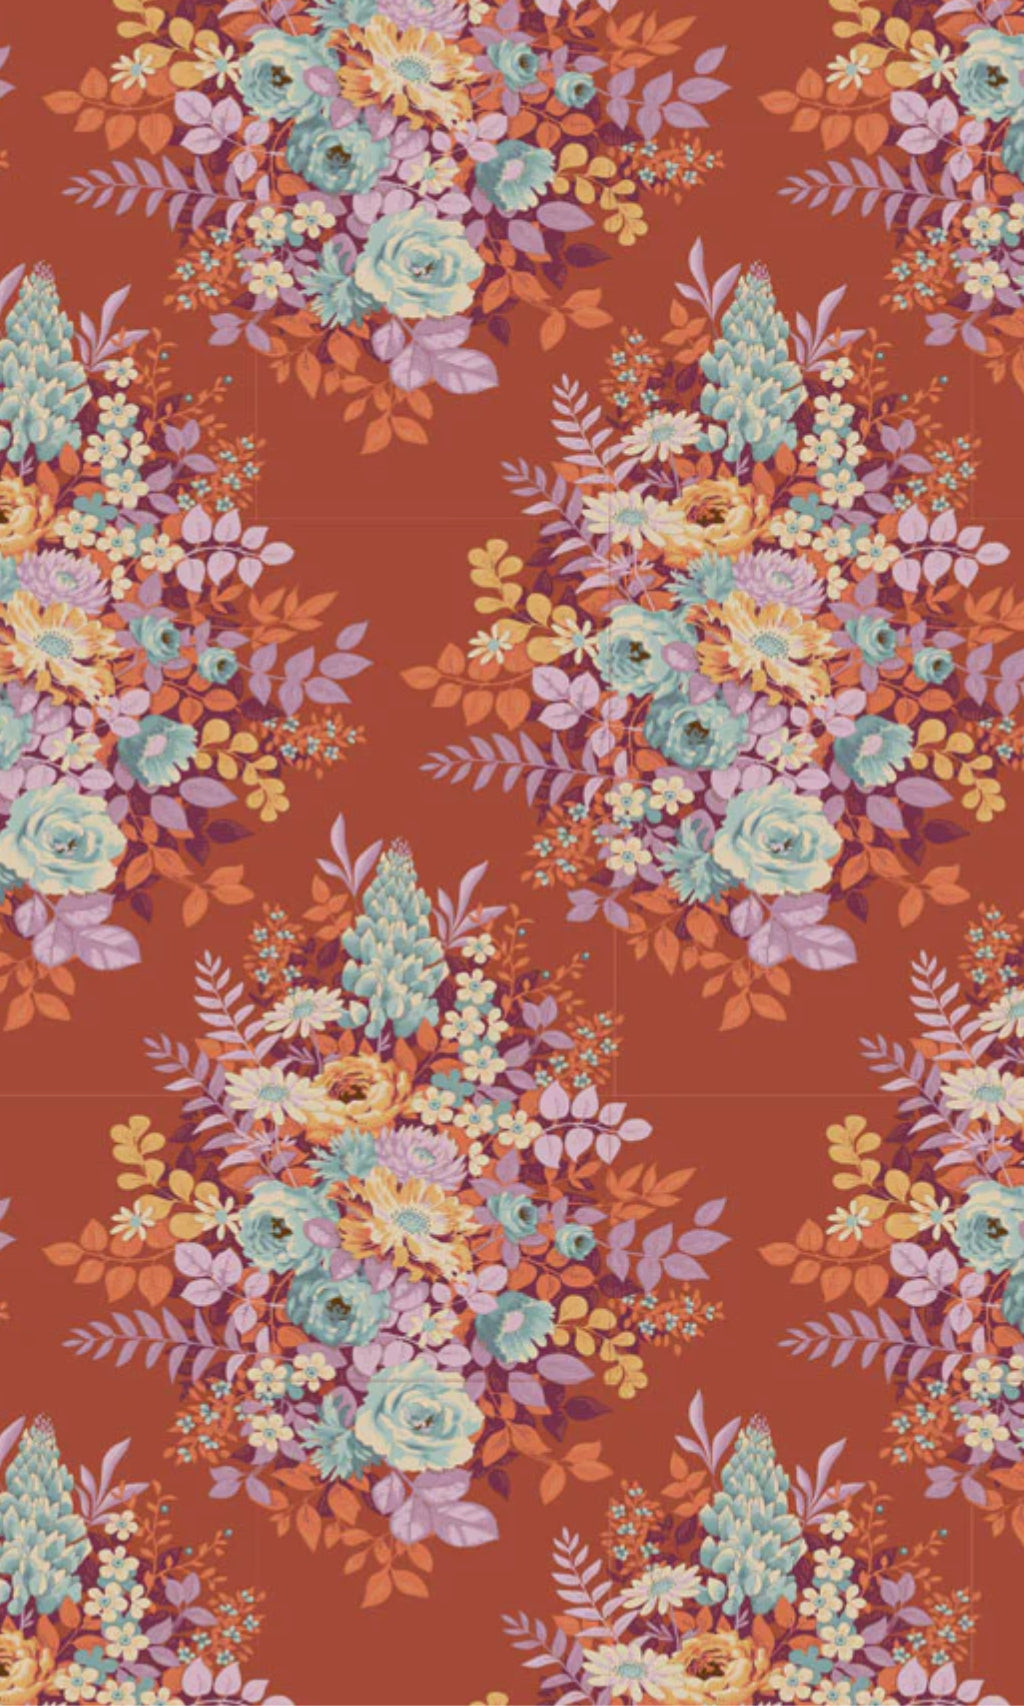 An image of the Whimsy Flower fabric